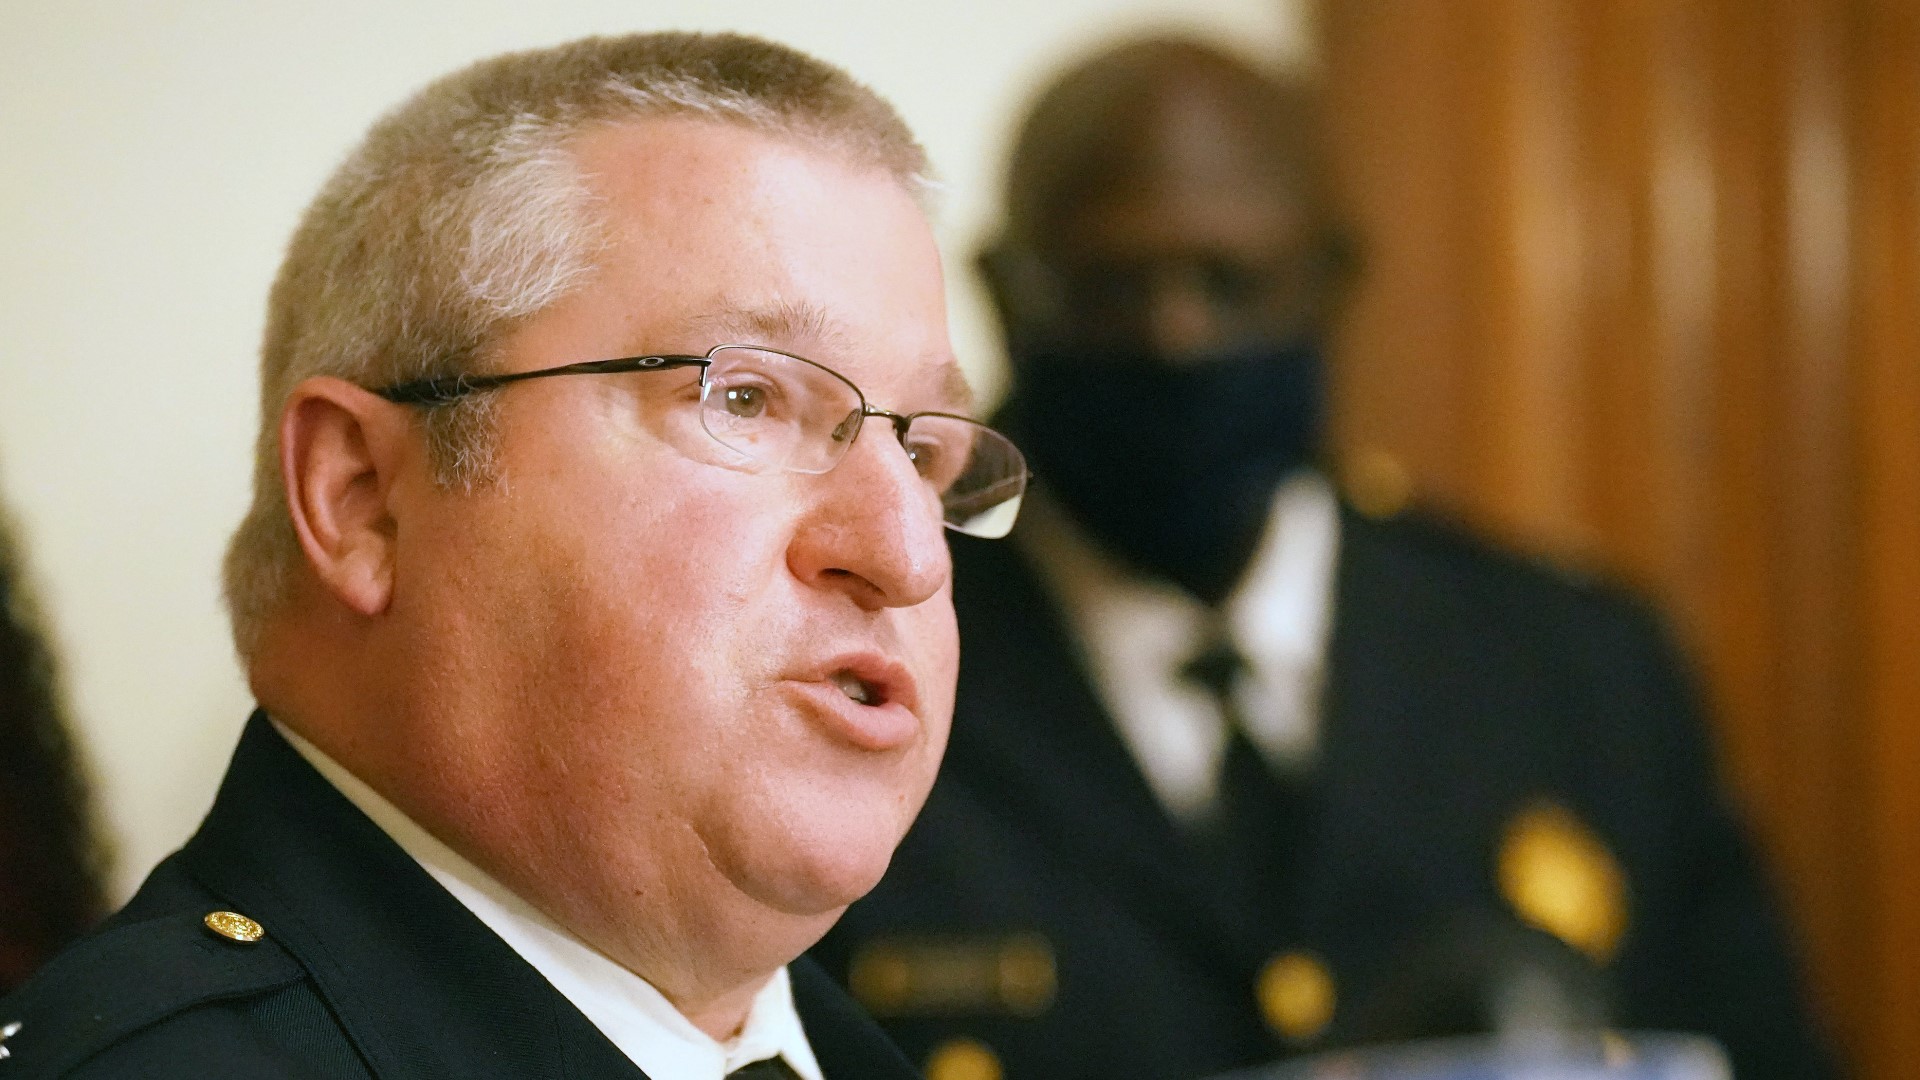 A former frontrunner to become St. Louis’s next police chief has sued the city. He alleges he was passed over for the promotion because he is white.